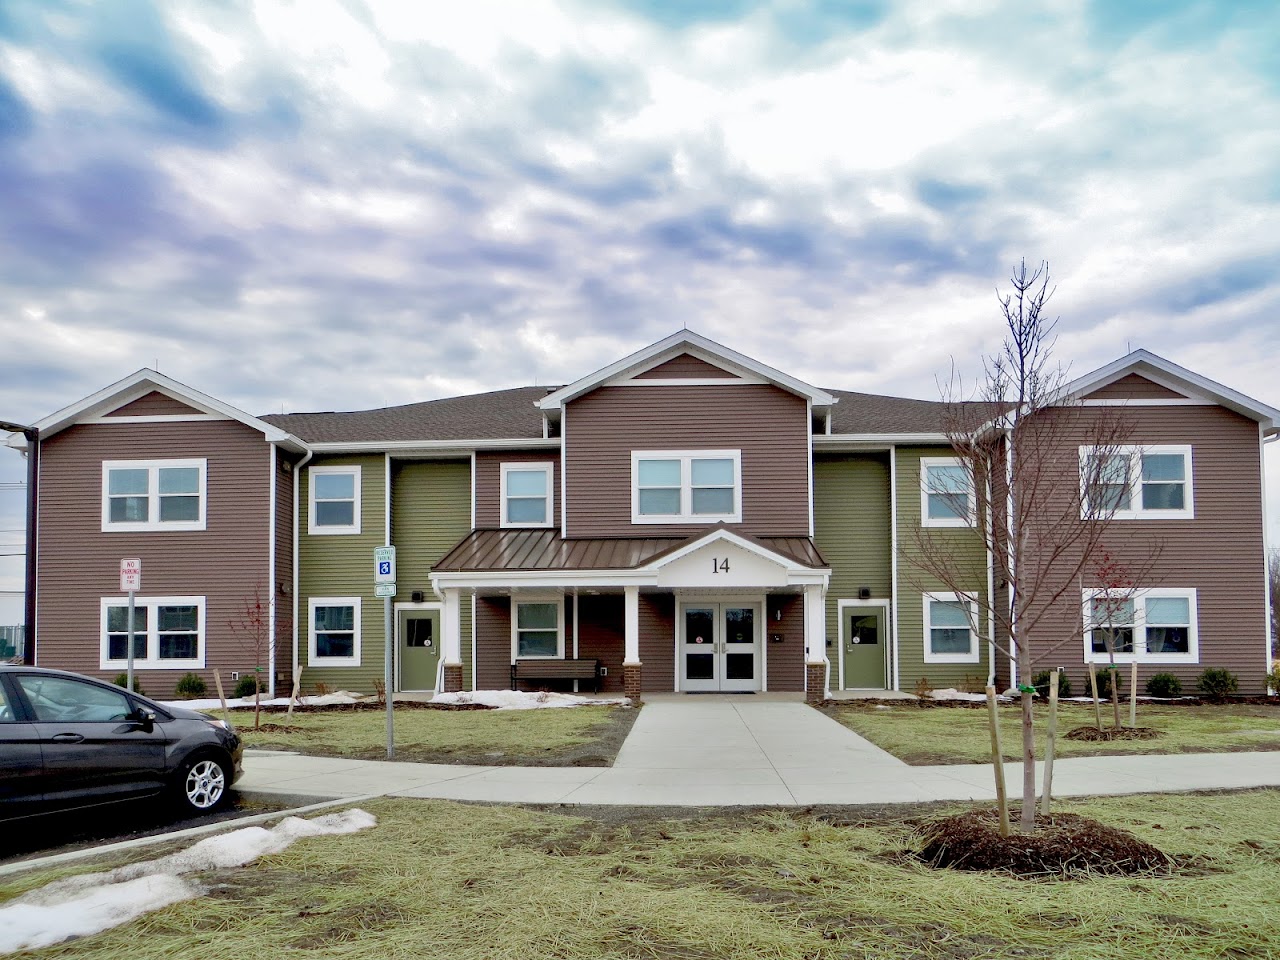 Photo of SKYBIRD LANDING. Affordable housing located at BLDG A MUSTANG CIRCLE GENESEO, NY 14454